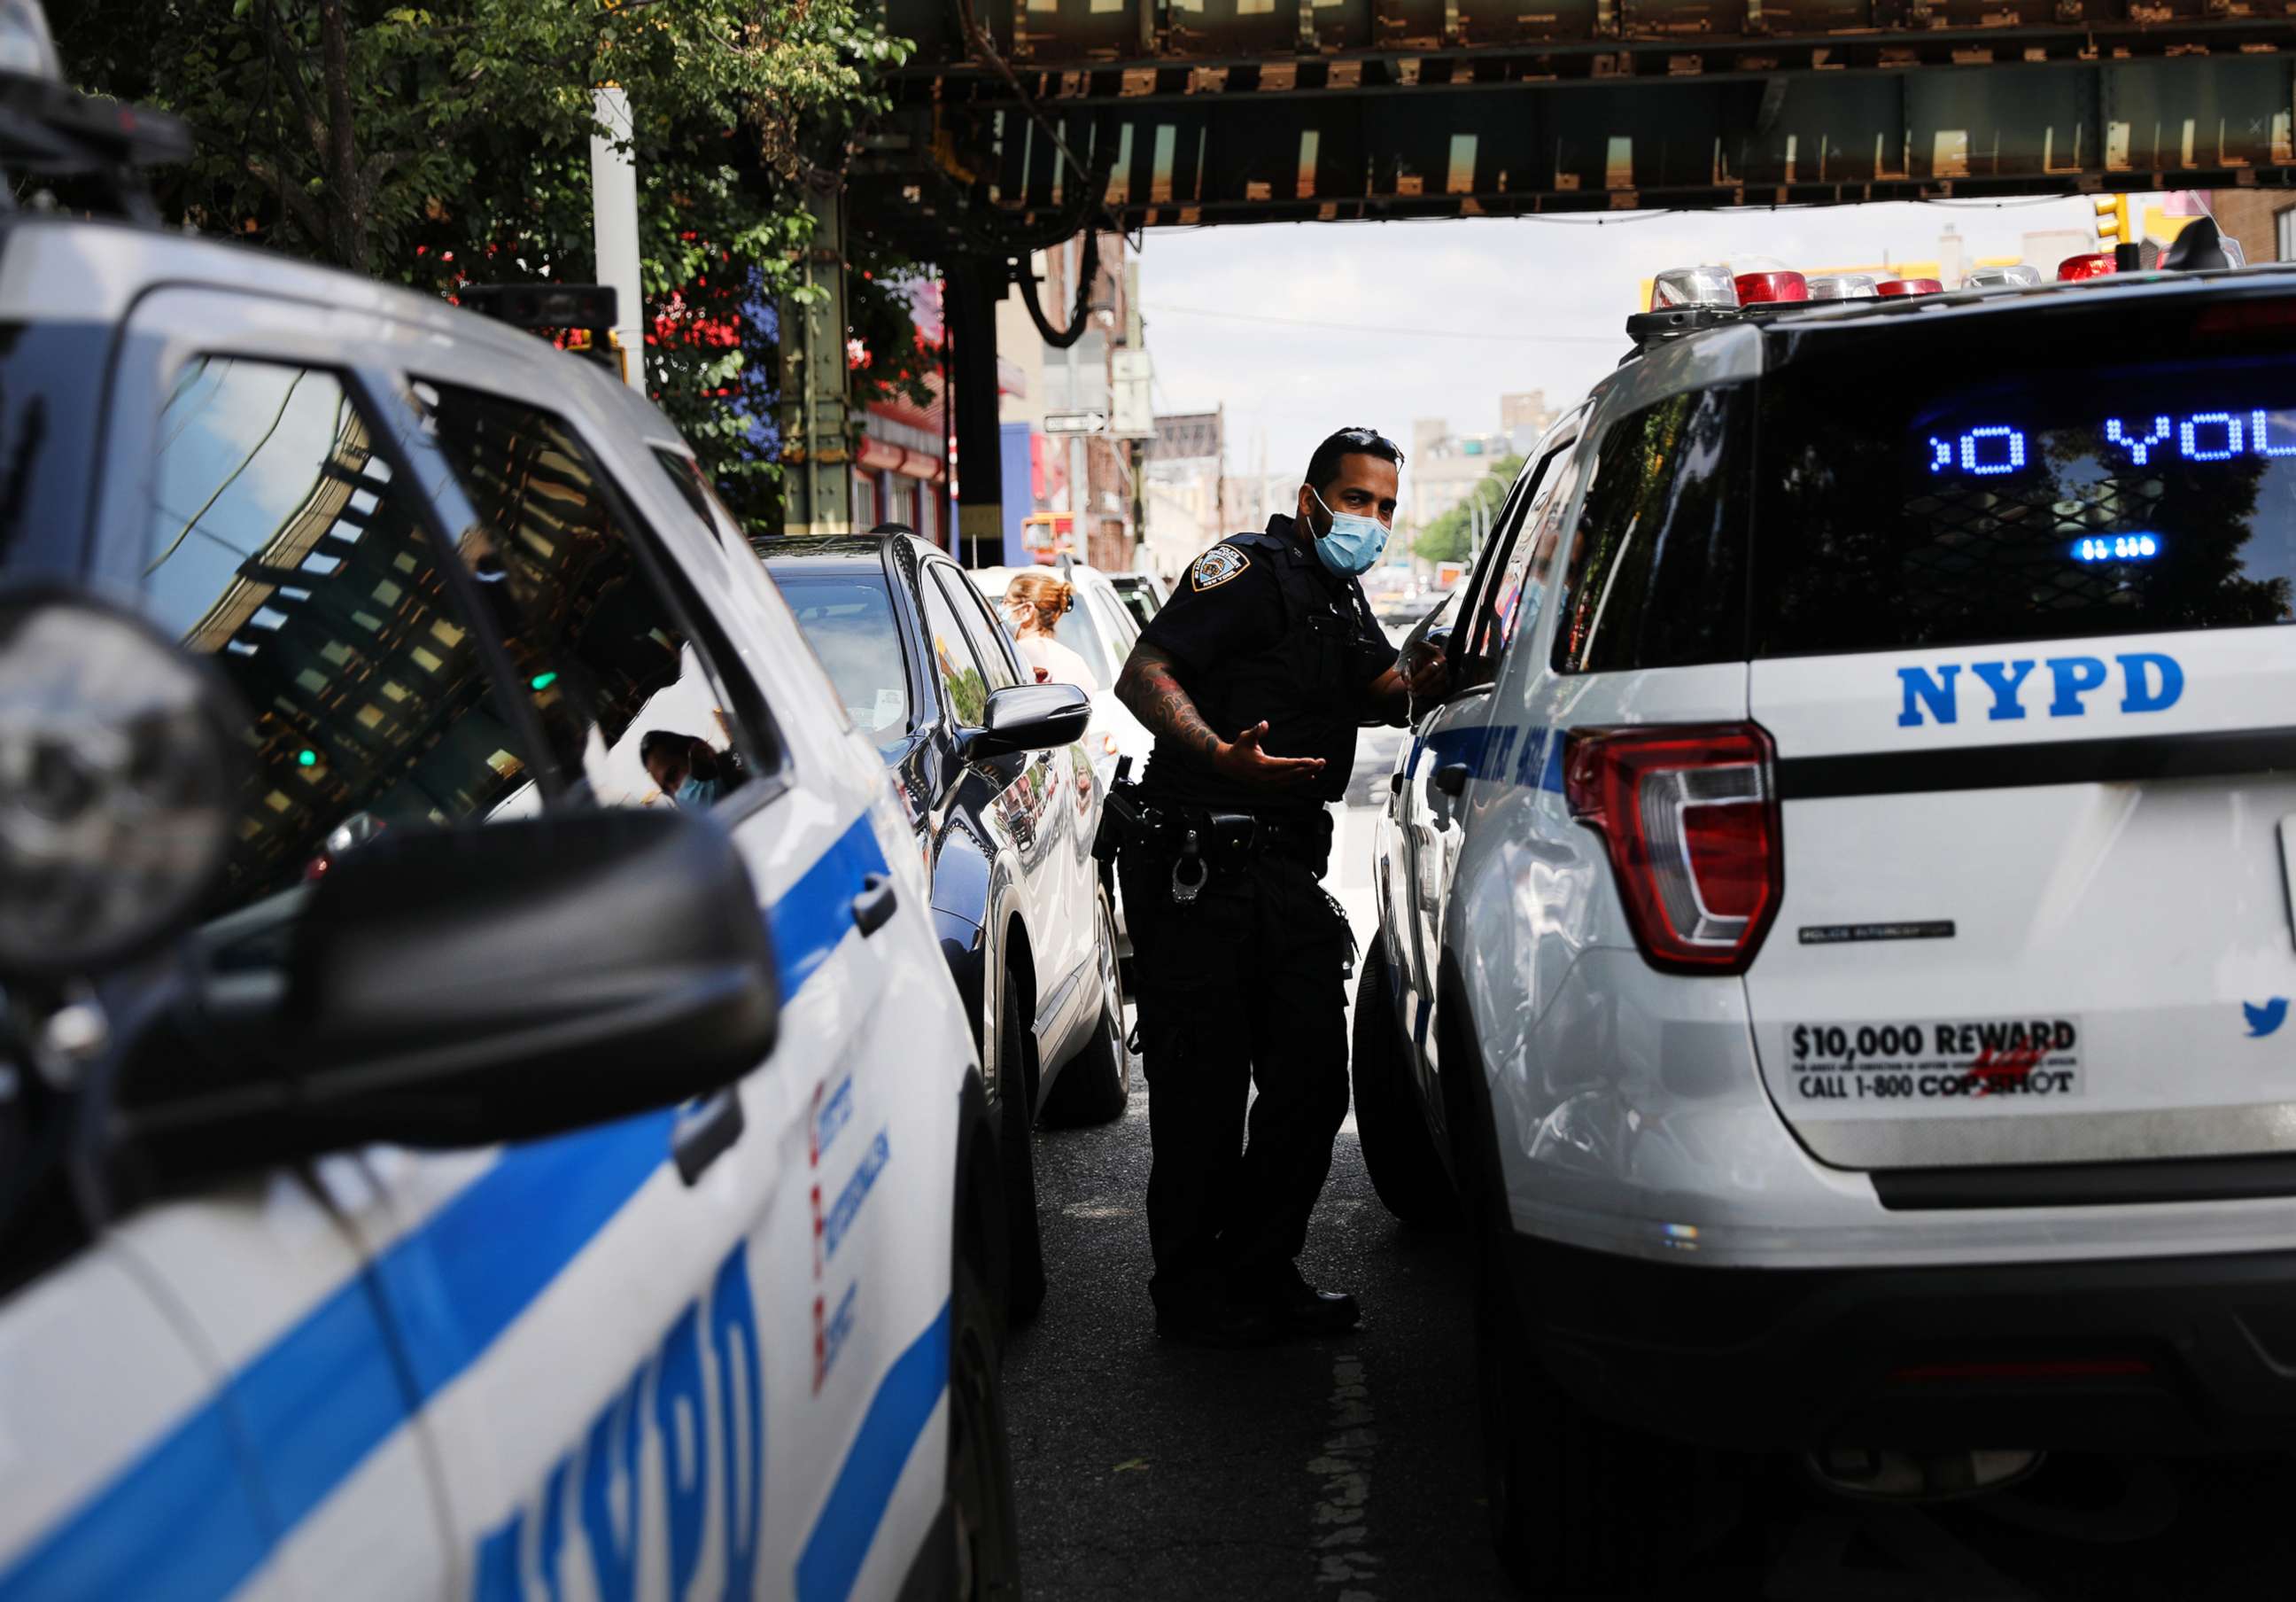 PHOTO: Police speak at the scene of an afternoon shooting that left one person dead on July 07, 2020, in the Brooklyn borough of New York.